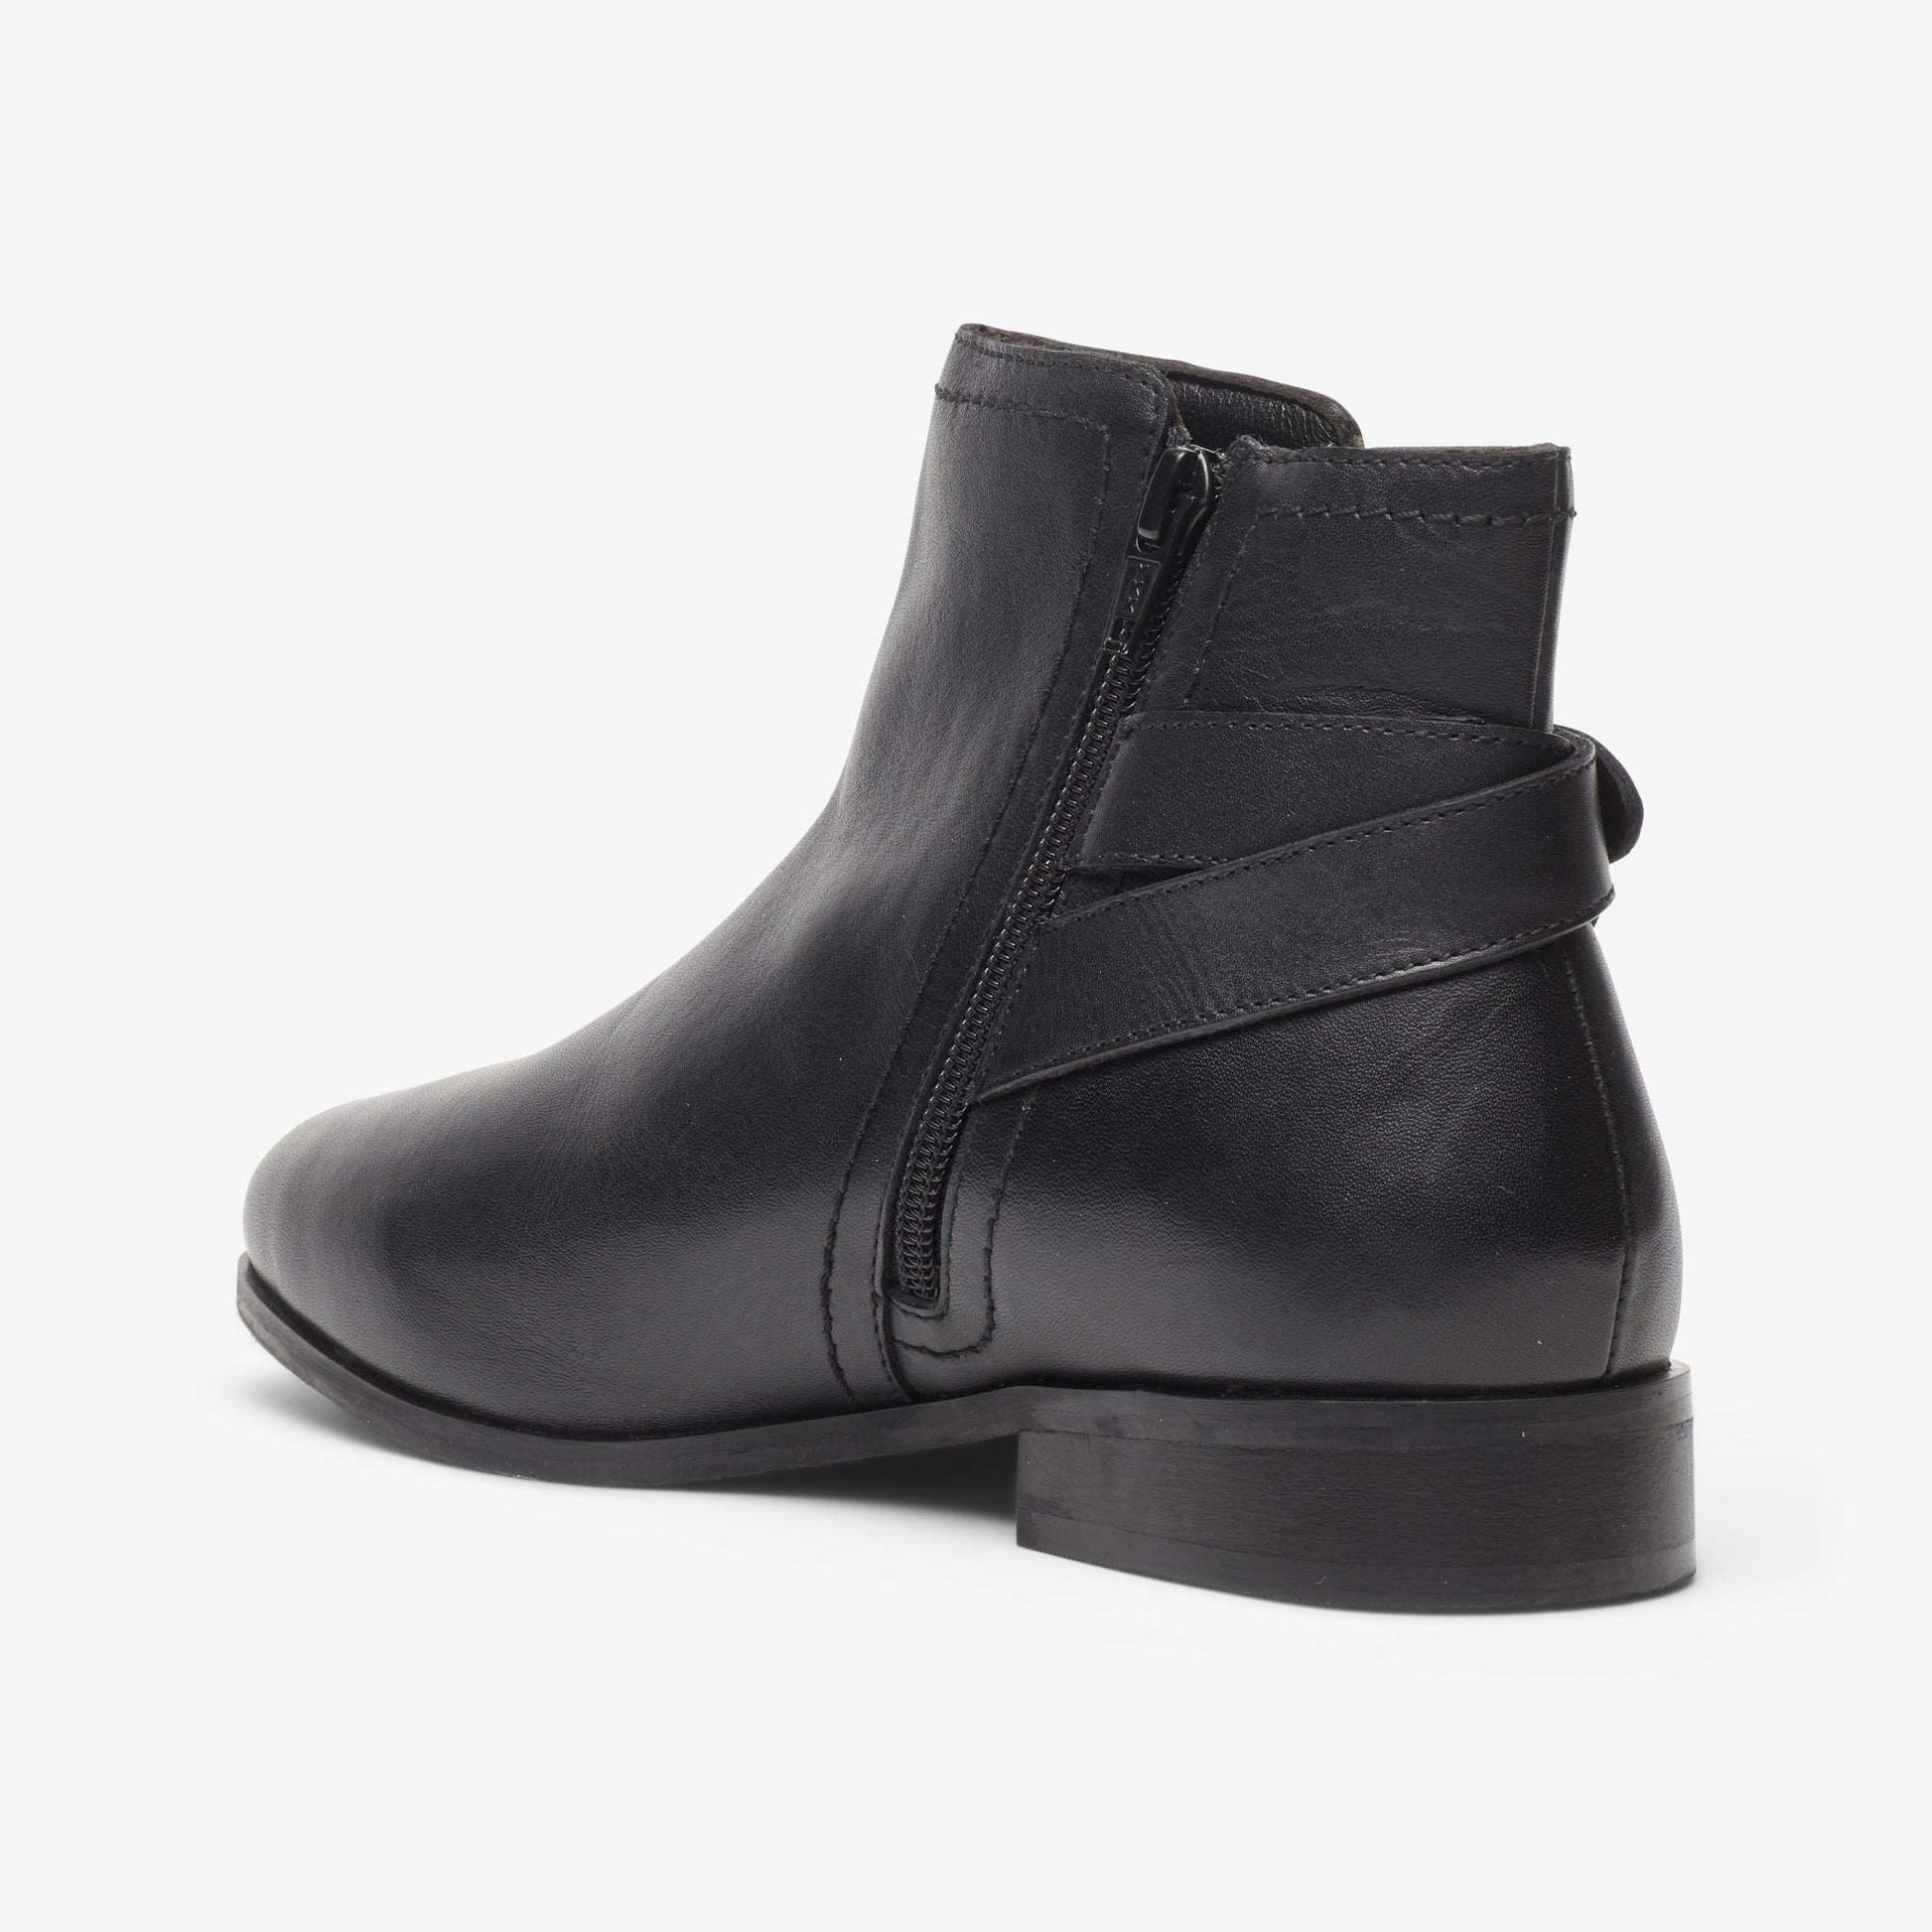 Rear view of wide fit leather ankle boot with strap and buckle detail